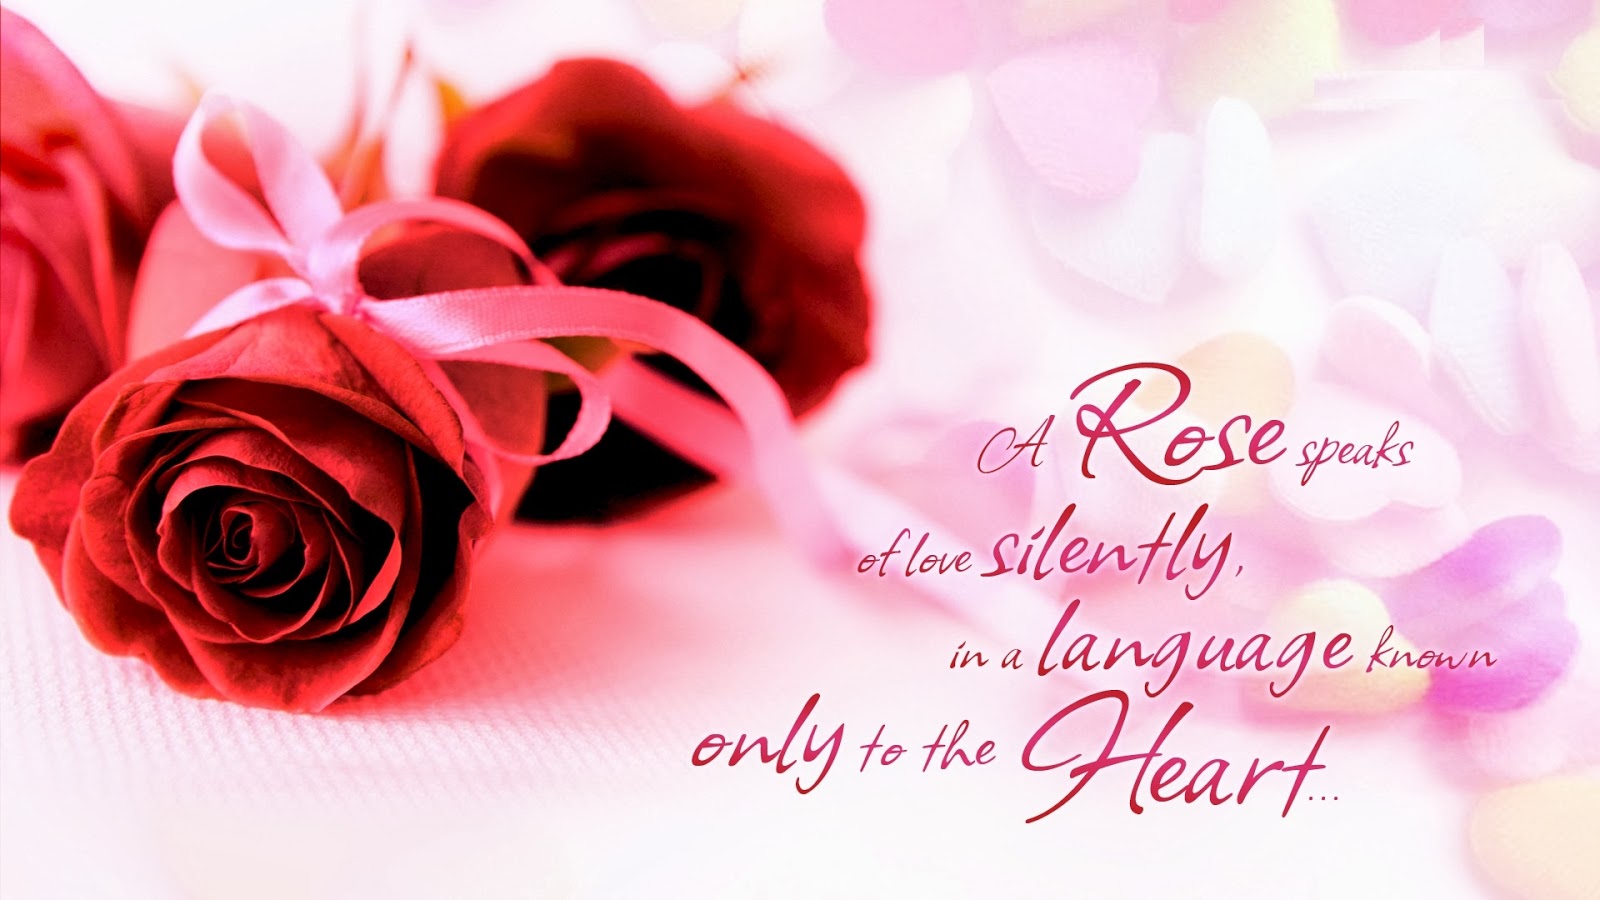 good morning wallpaper download,pink,text,red,valentine's day,garden roses